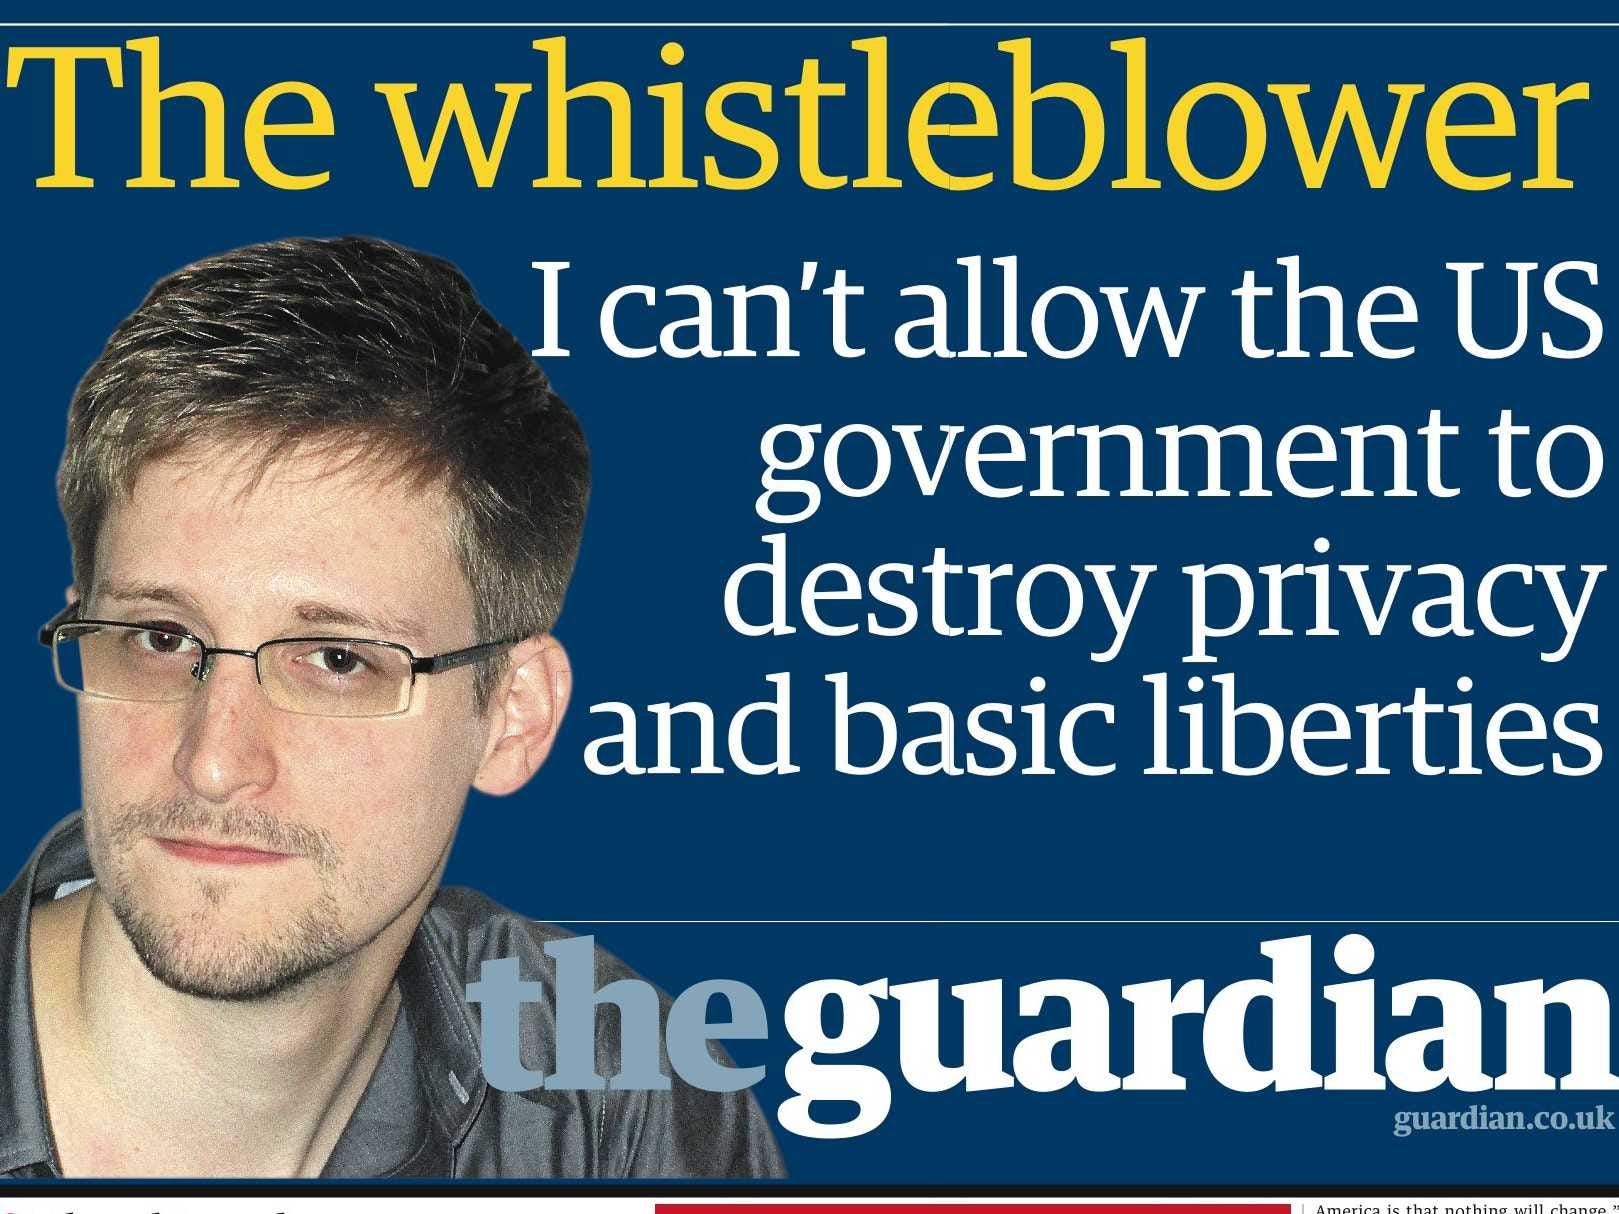 what-do-you-think-of-national-security-leaker-edward-snowden-poll.jpg